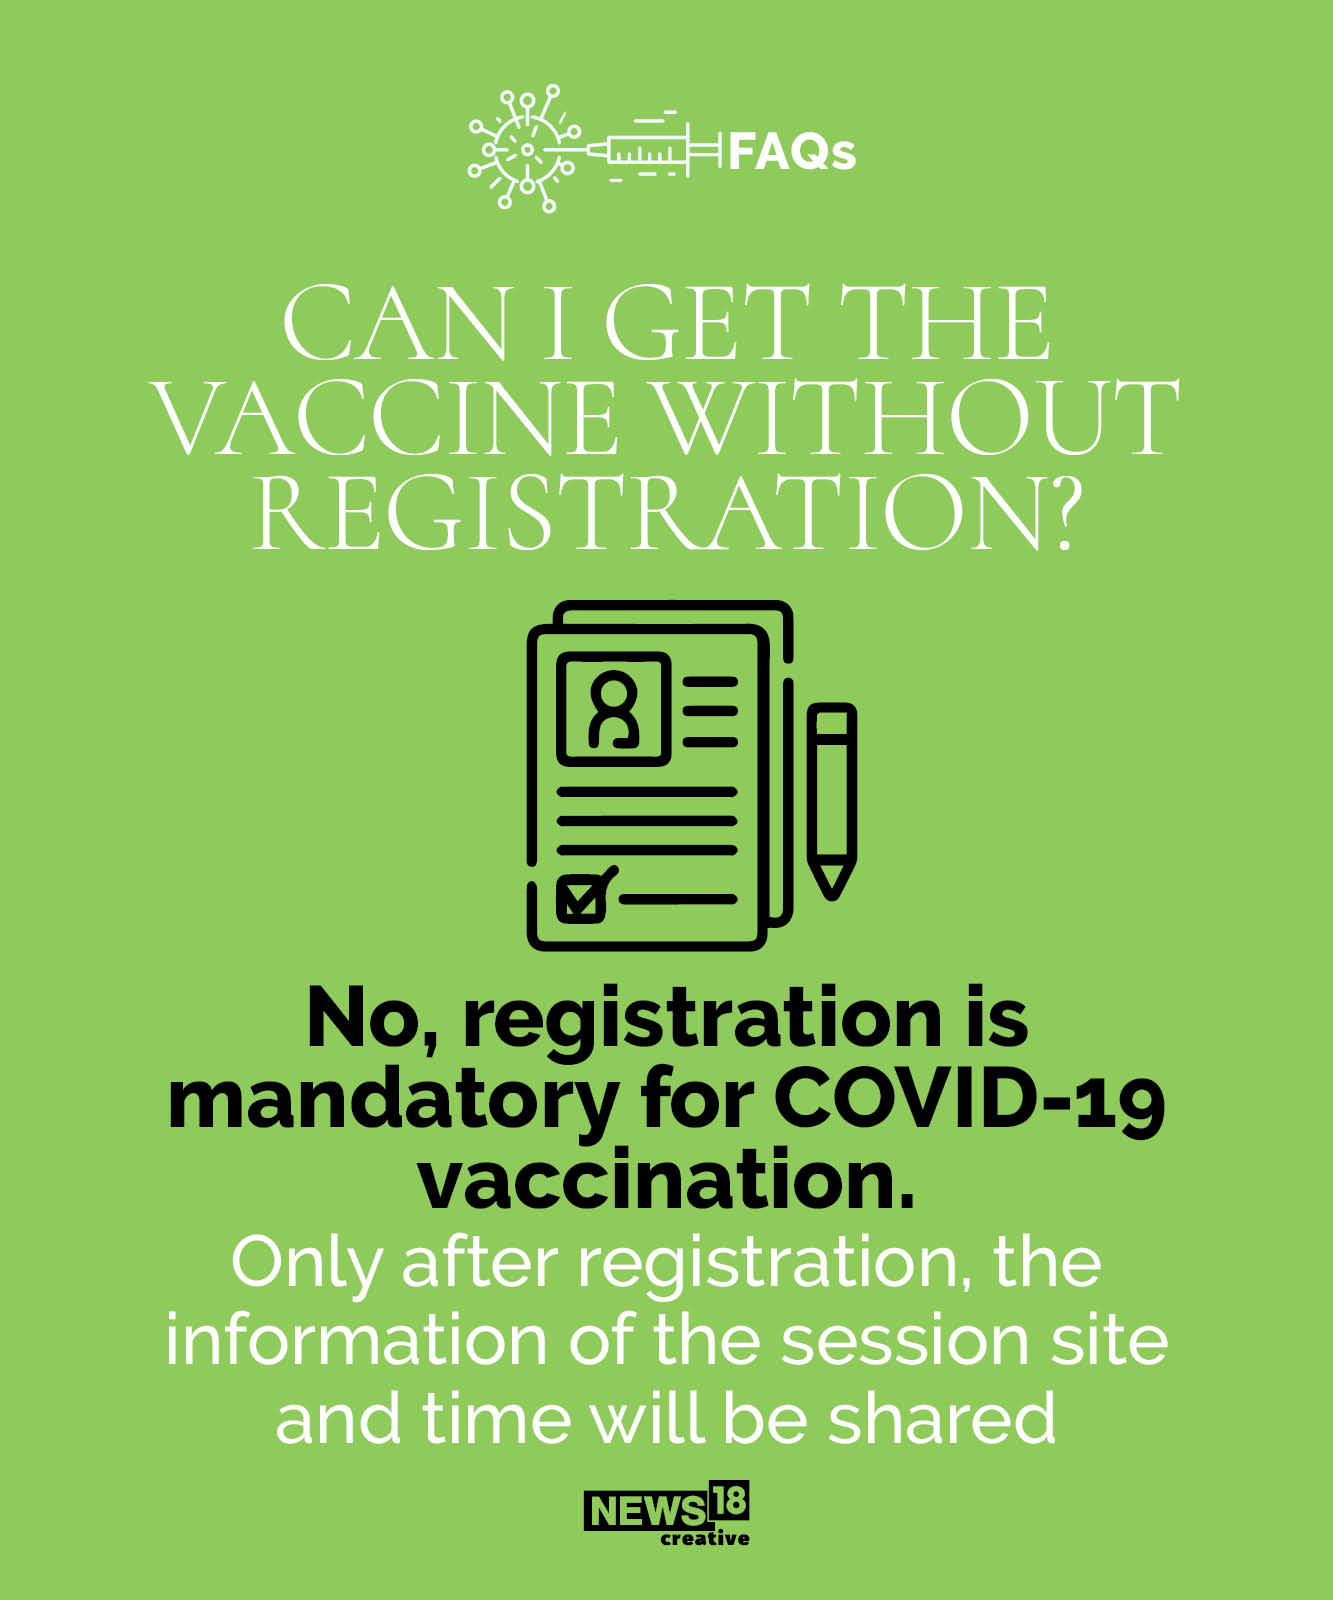 How to get in line for the Covid-19 vaccine